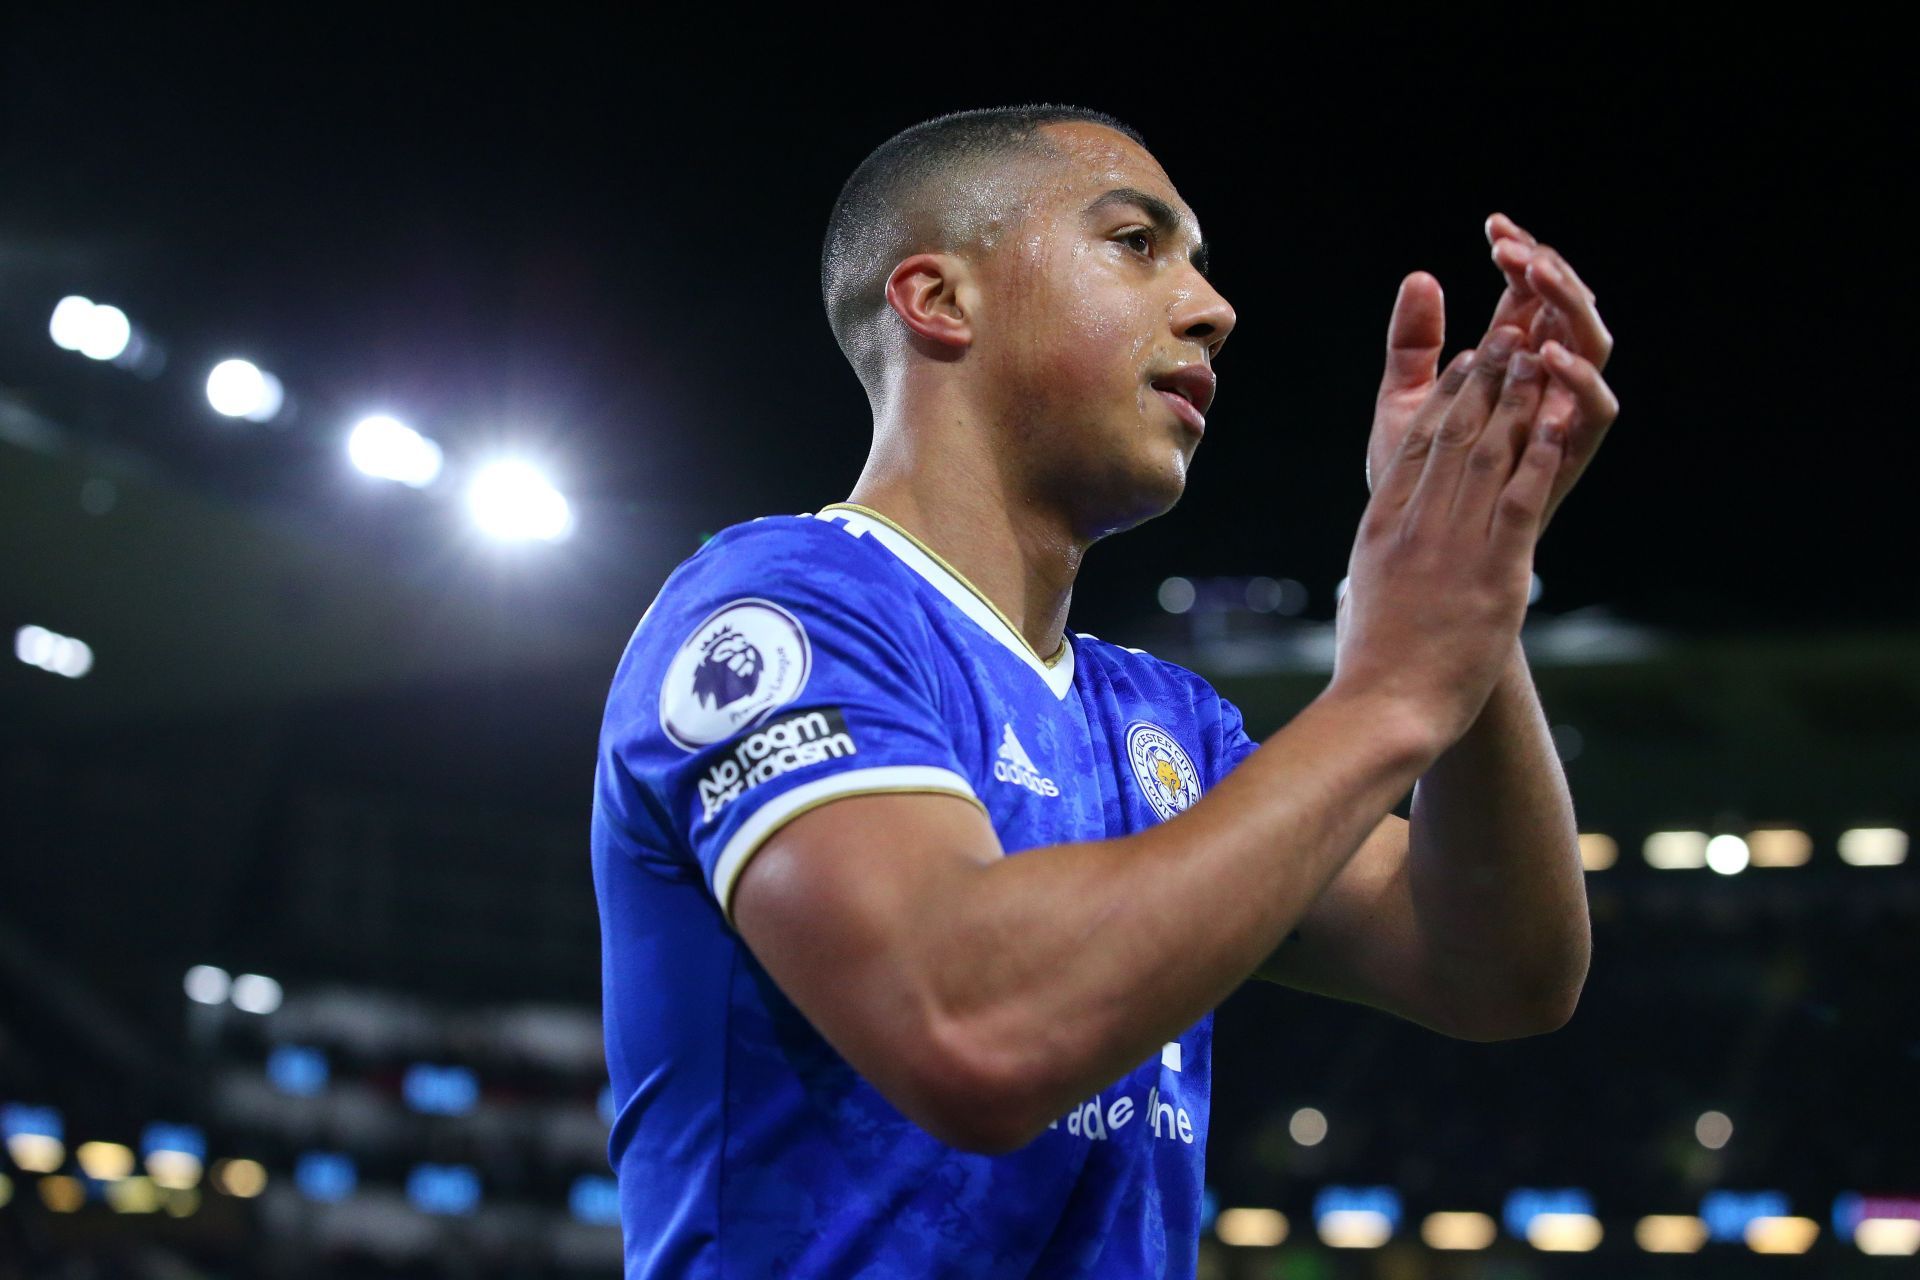 Tielemans is highly rated in the Premier League